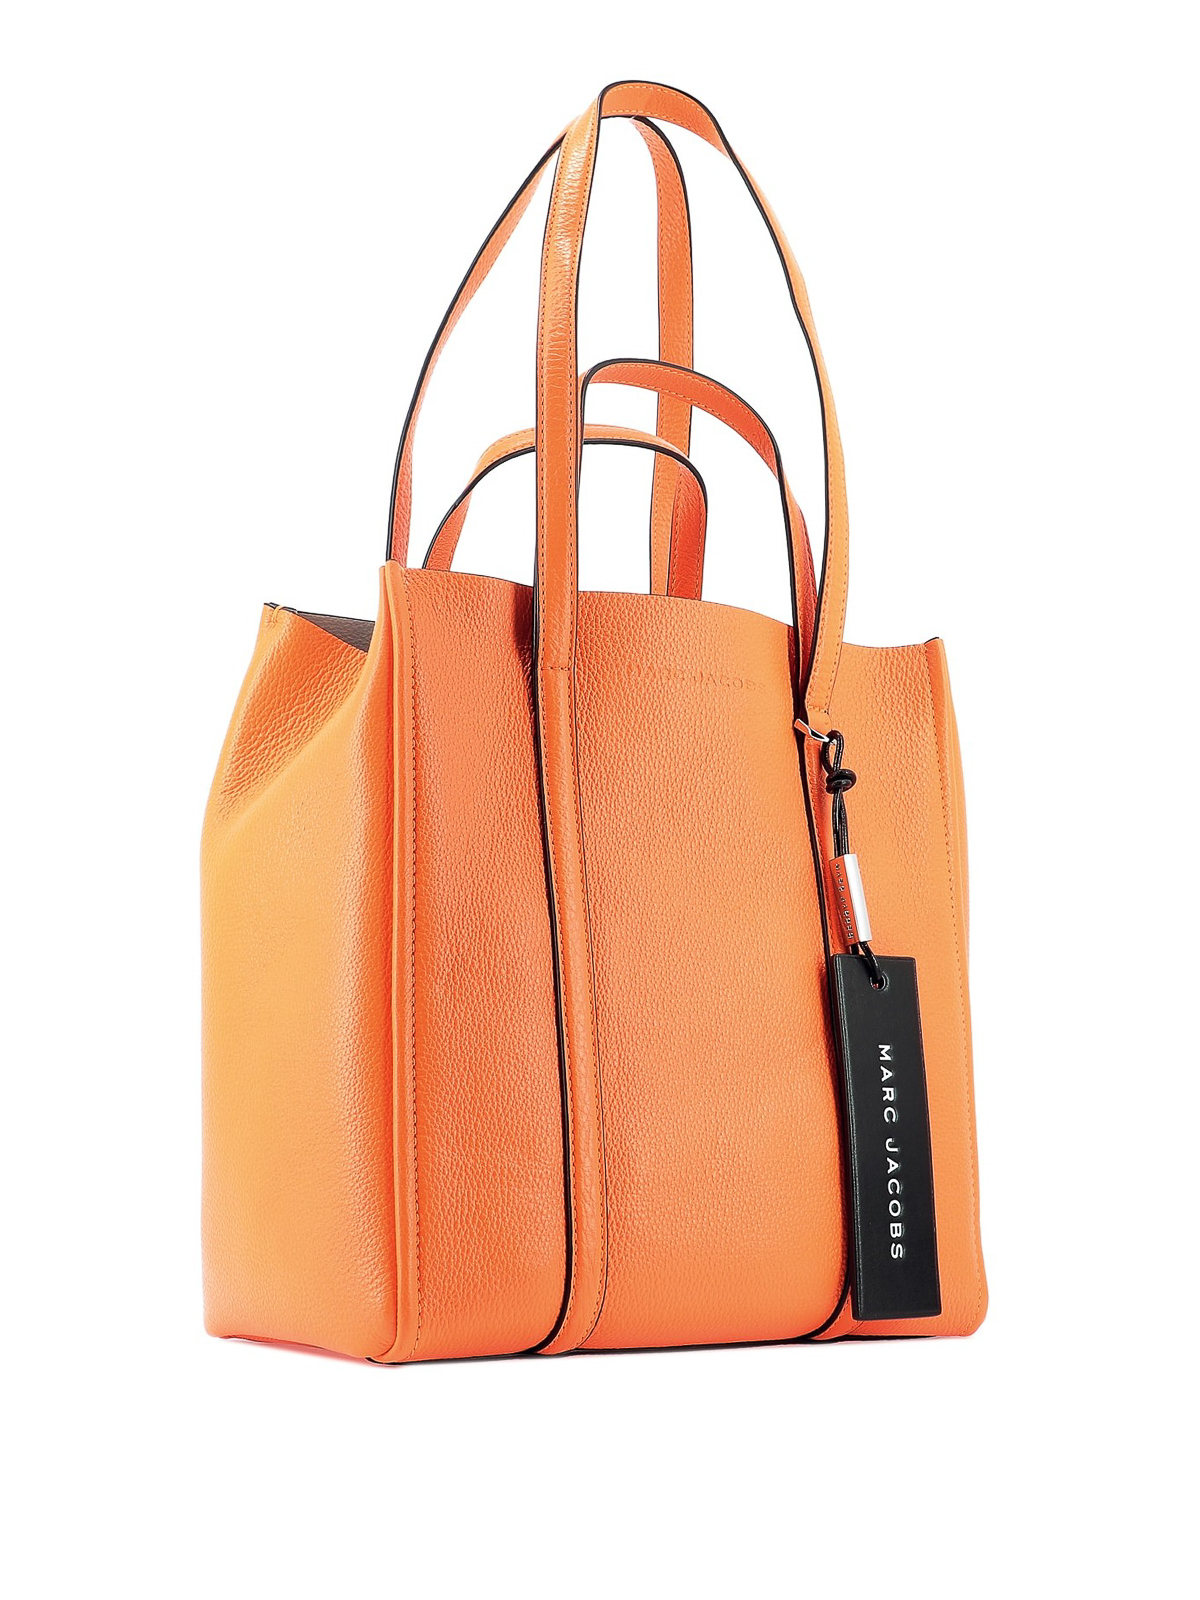 Marc Jacobs - The Tag orange tote - totes bags - M0014489802 ...